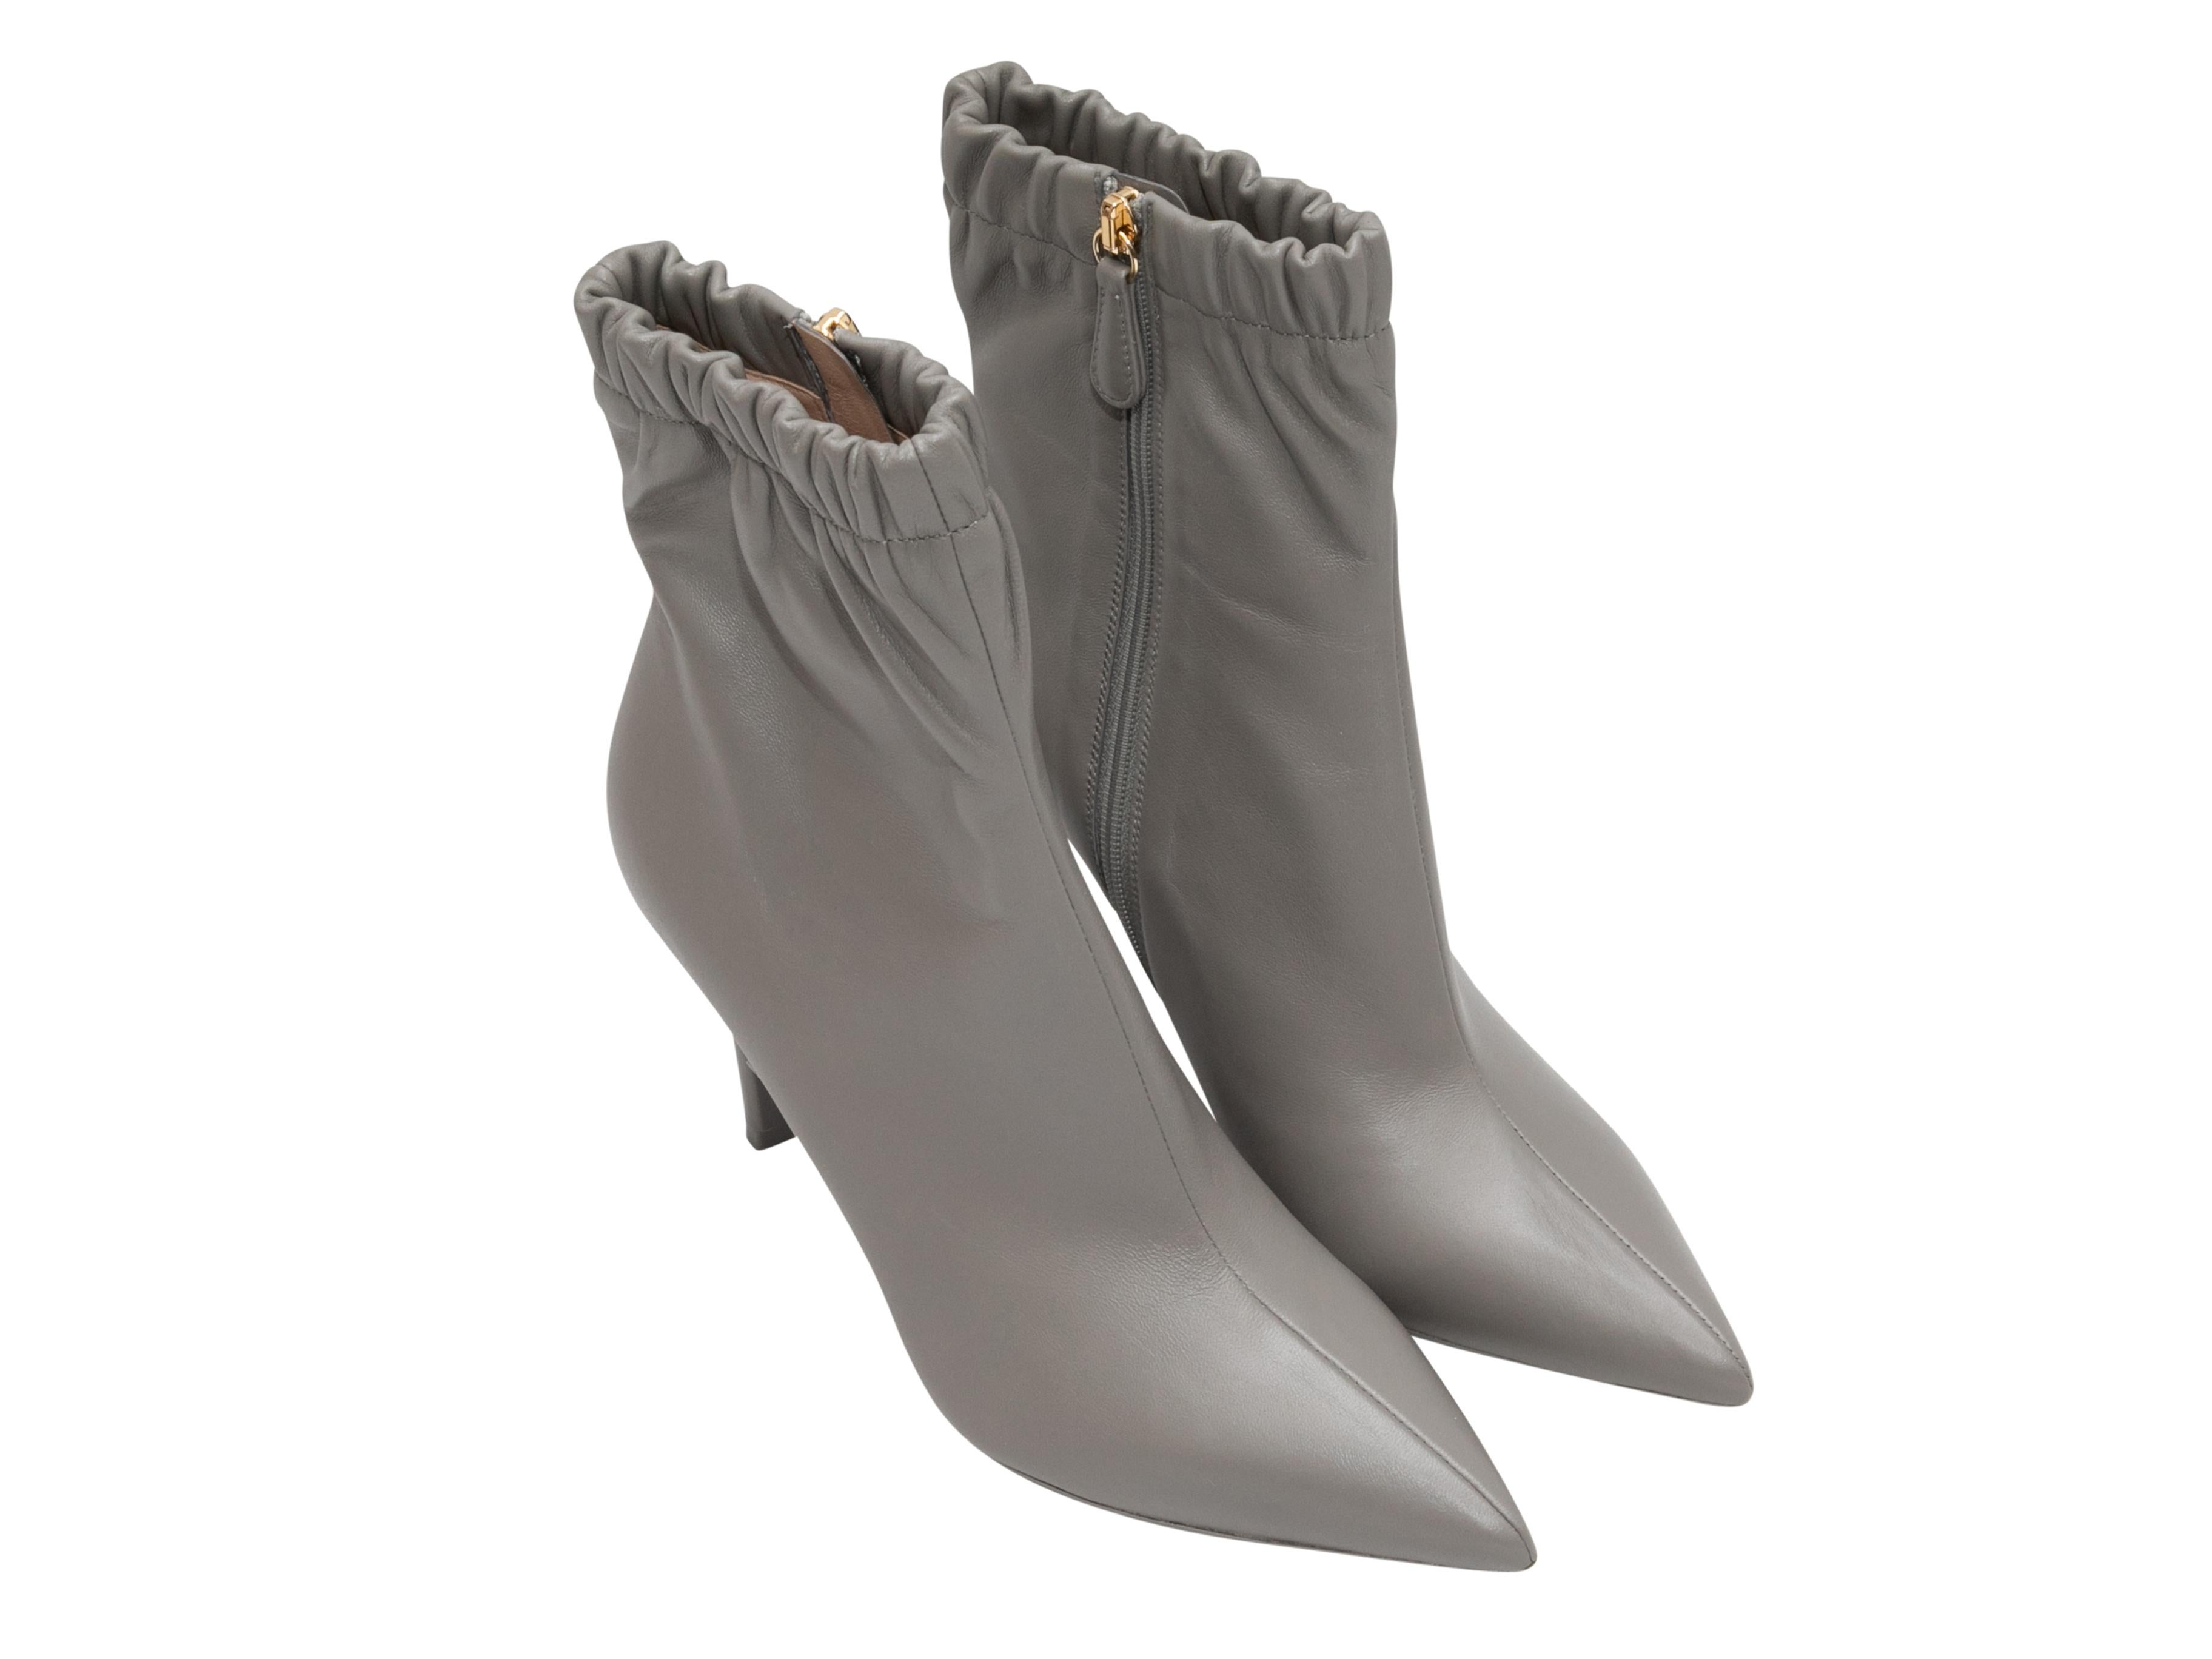 Grey leather Alina pointed-toe ankle boots by Gianvito Rossi. Zip closures at inner sides. 5.75